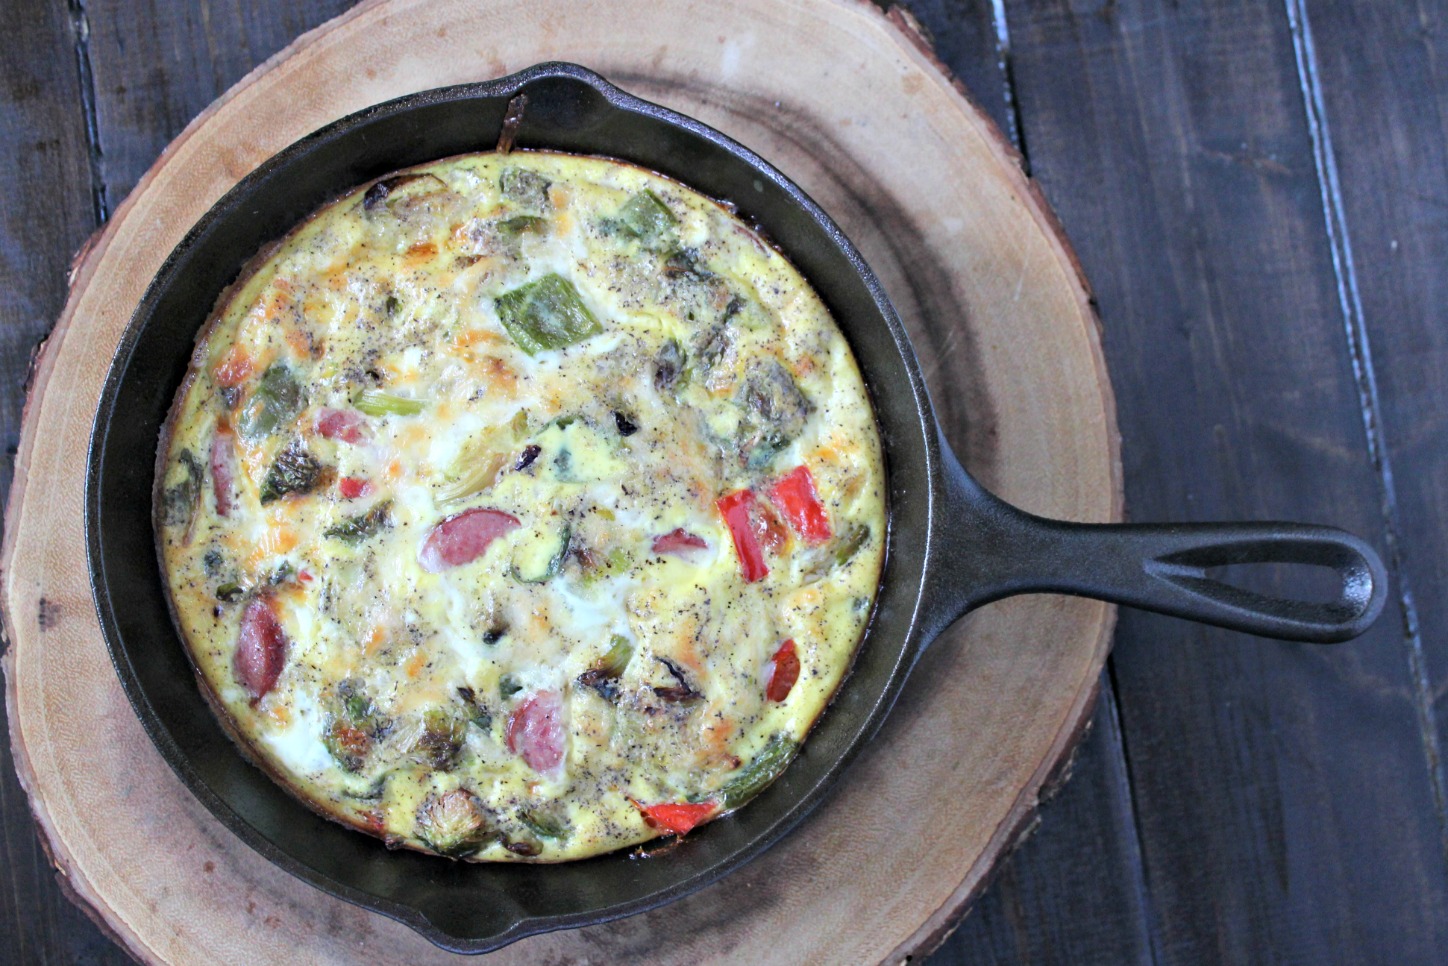 Brussel Sprouts & Turkey Sausage Frittata